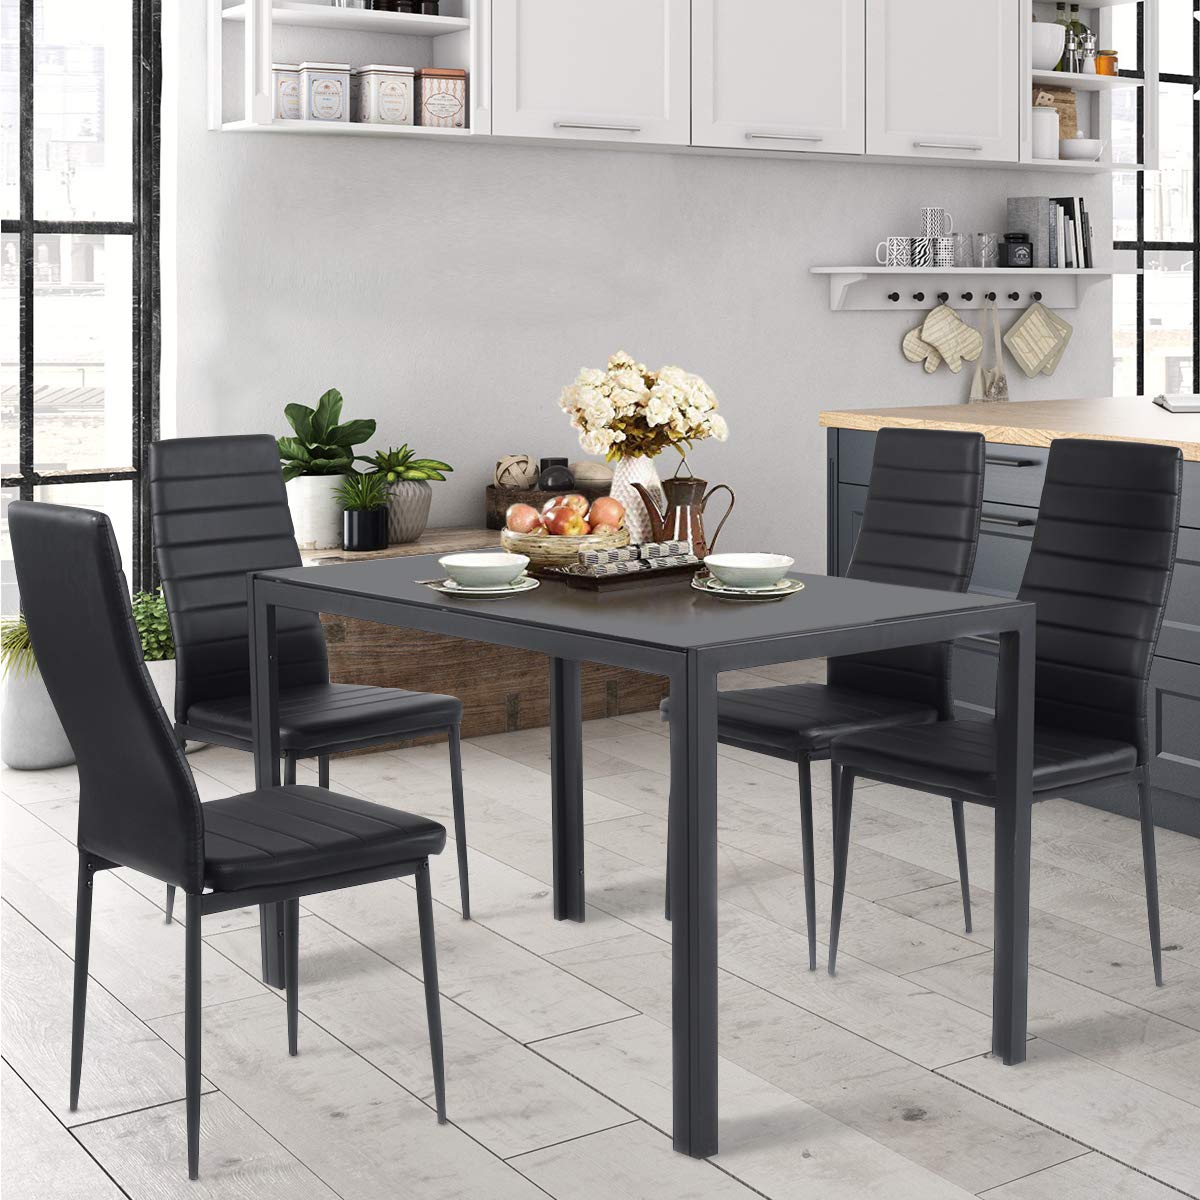 Giantex 5 Pcs Dining Table Set for 4